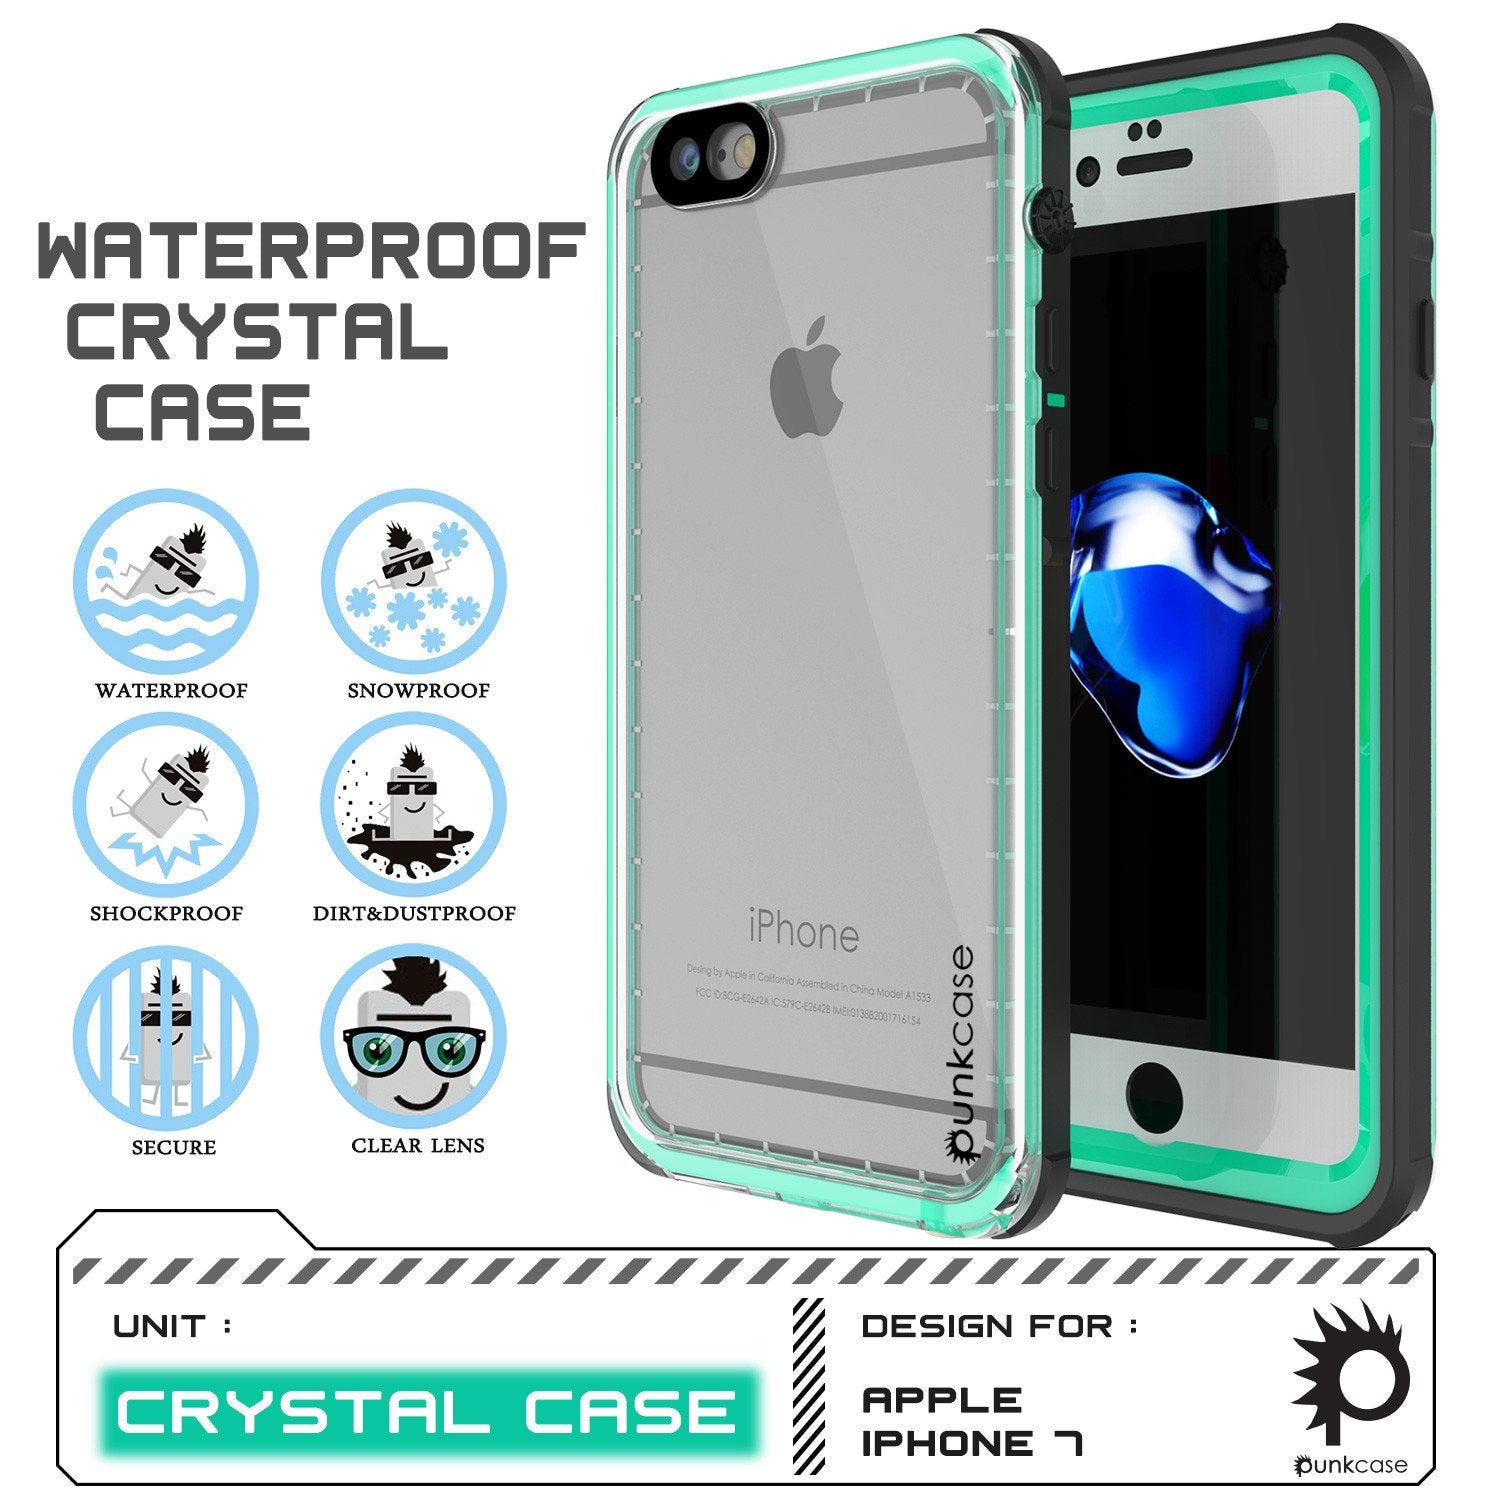 Apple iPhone 7 Waterproof Case, PUNKcase CRYSTAL Teal W/ Attached Screen Protector  | Warranty